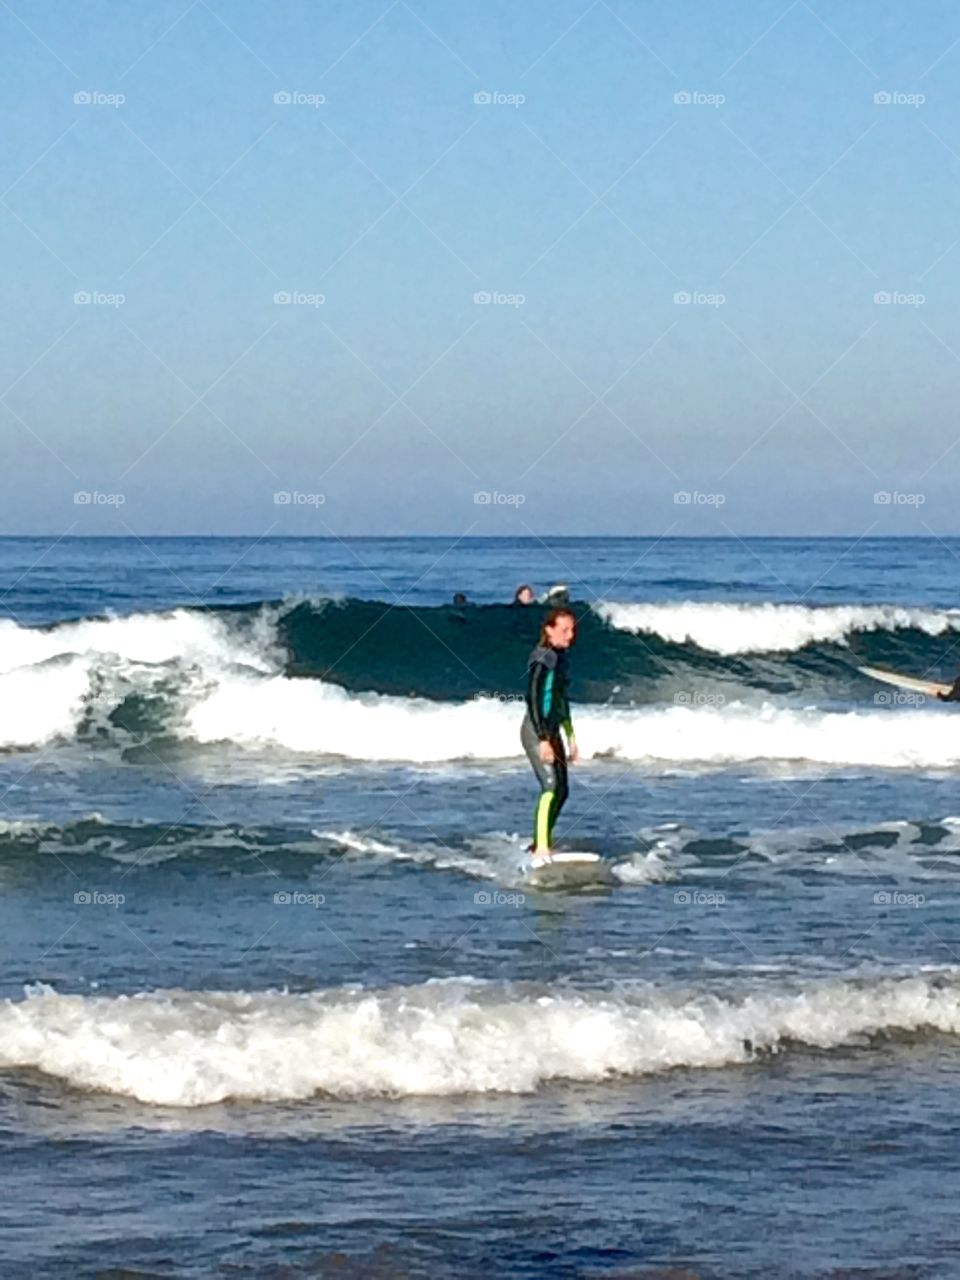 Smooth waves. Surfer in Newport Beach